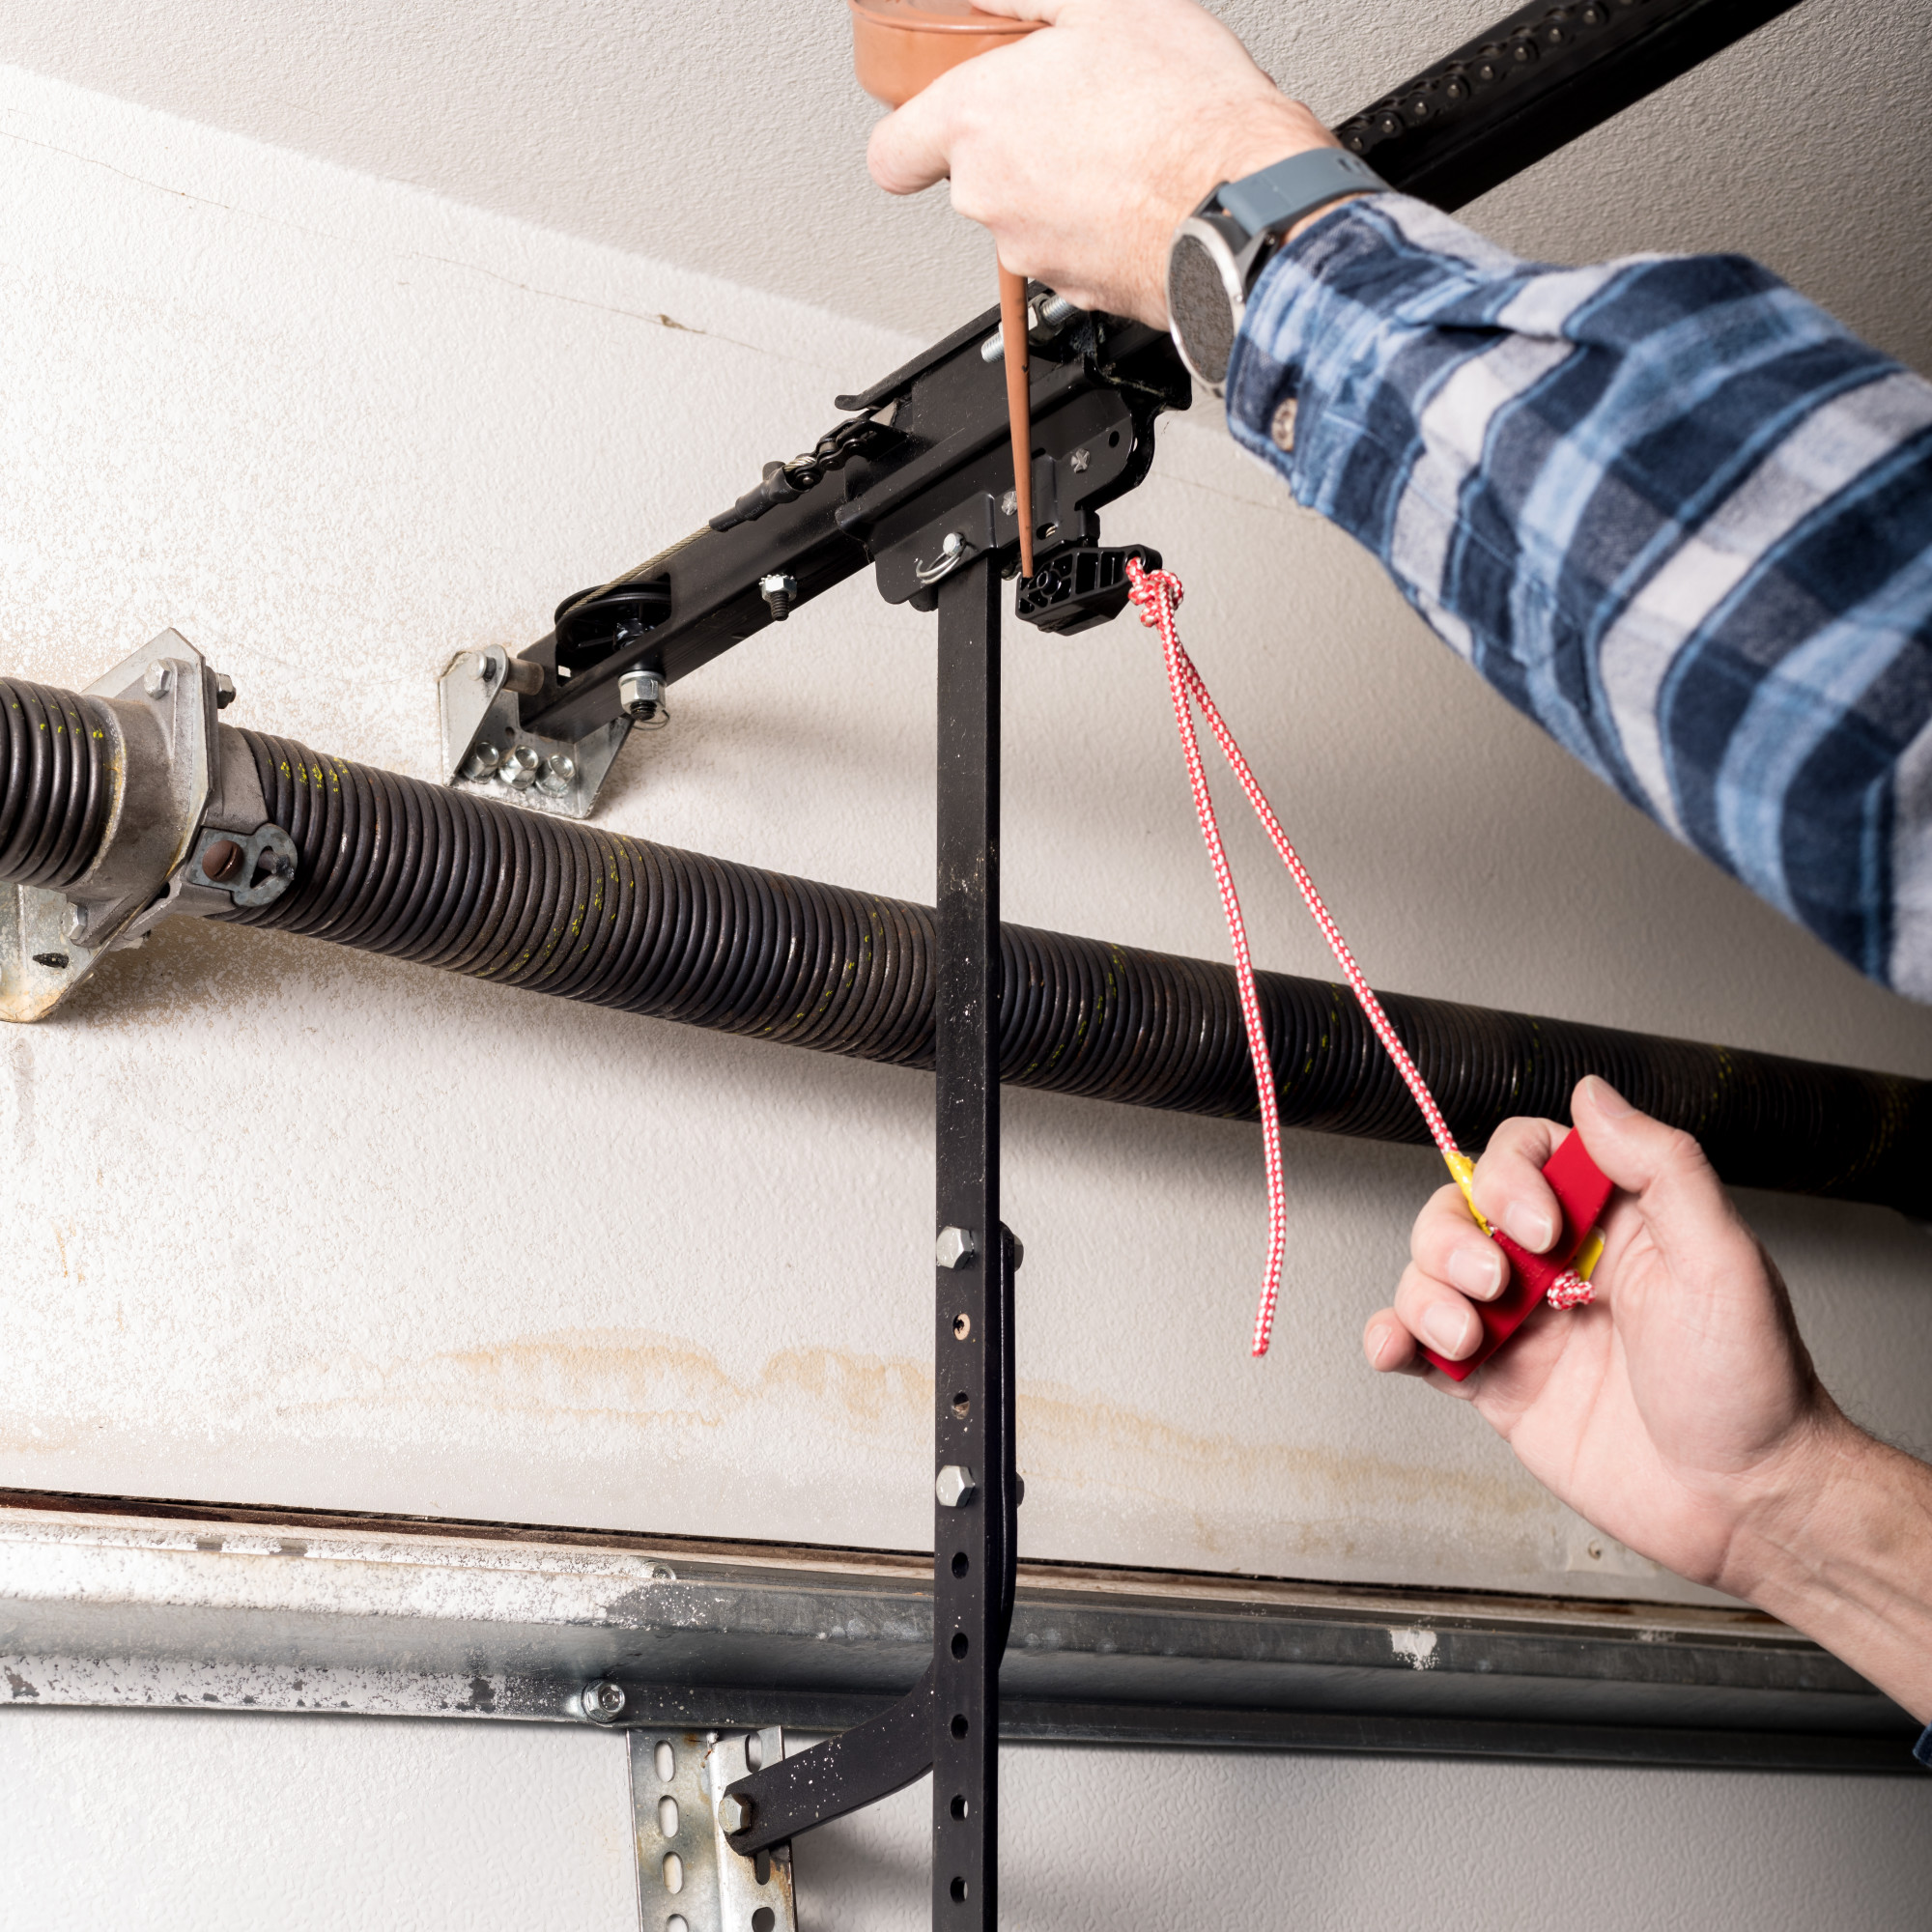 People use there garage door more than they think. It was bound to break or malfunction. Read here on how to find the best garage door repair company for you.